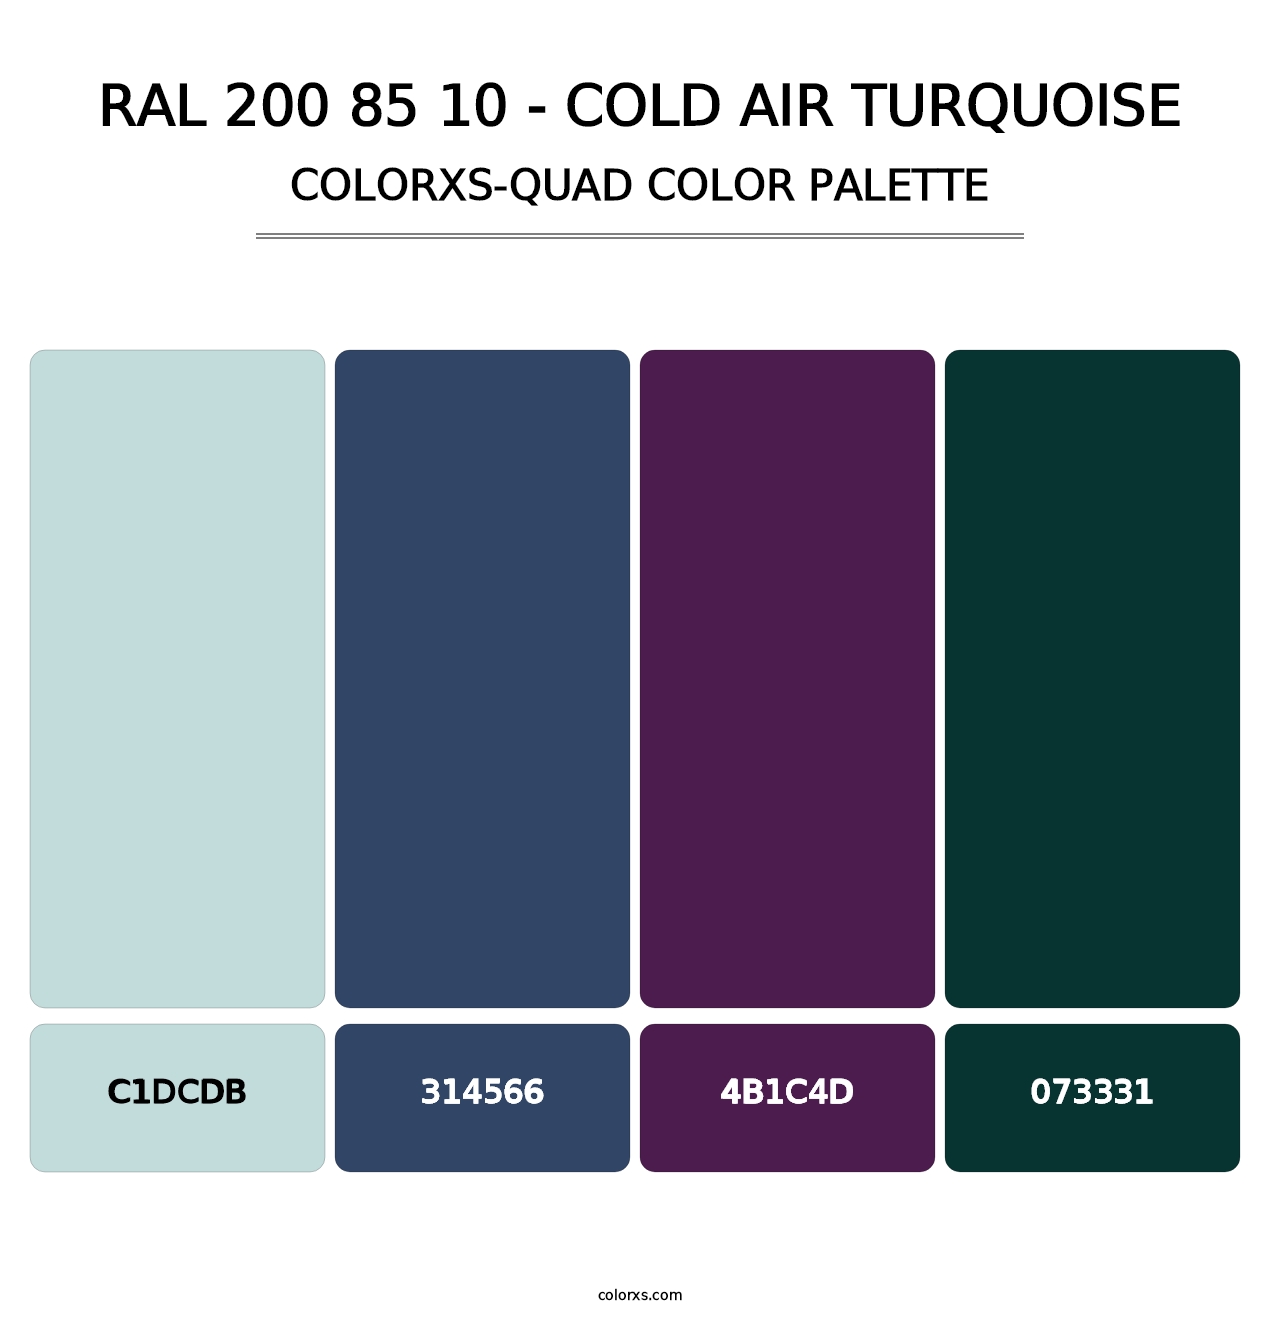 RAL 200 85 10 - Cold Air Turquoise - Colorxs Quad Palette